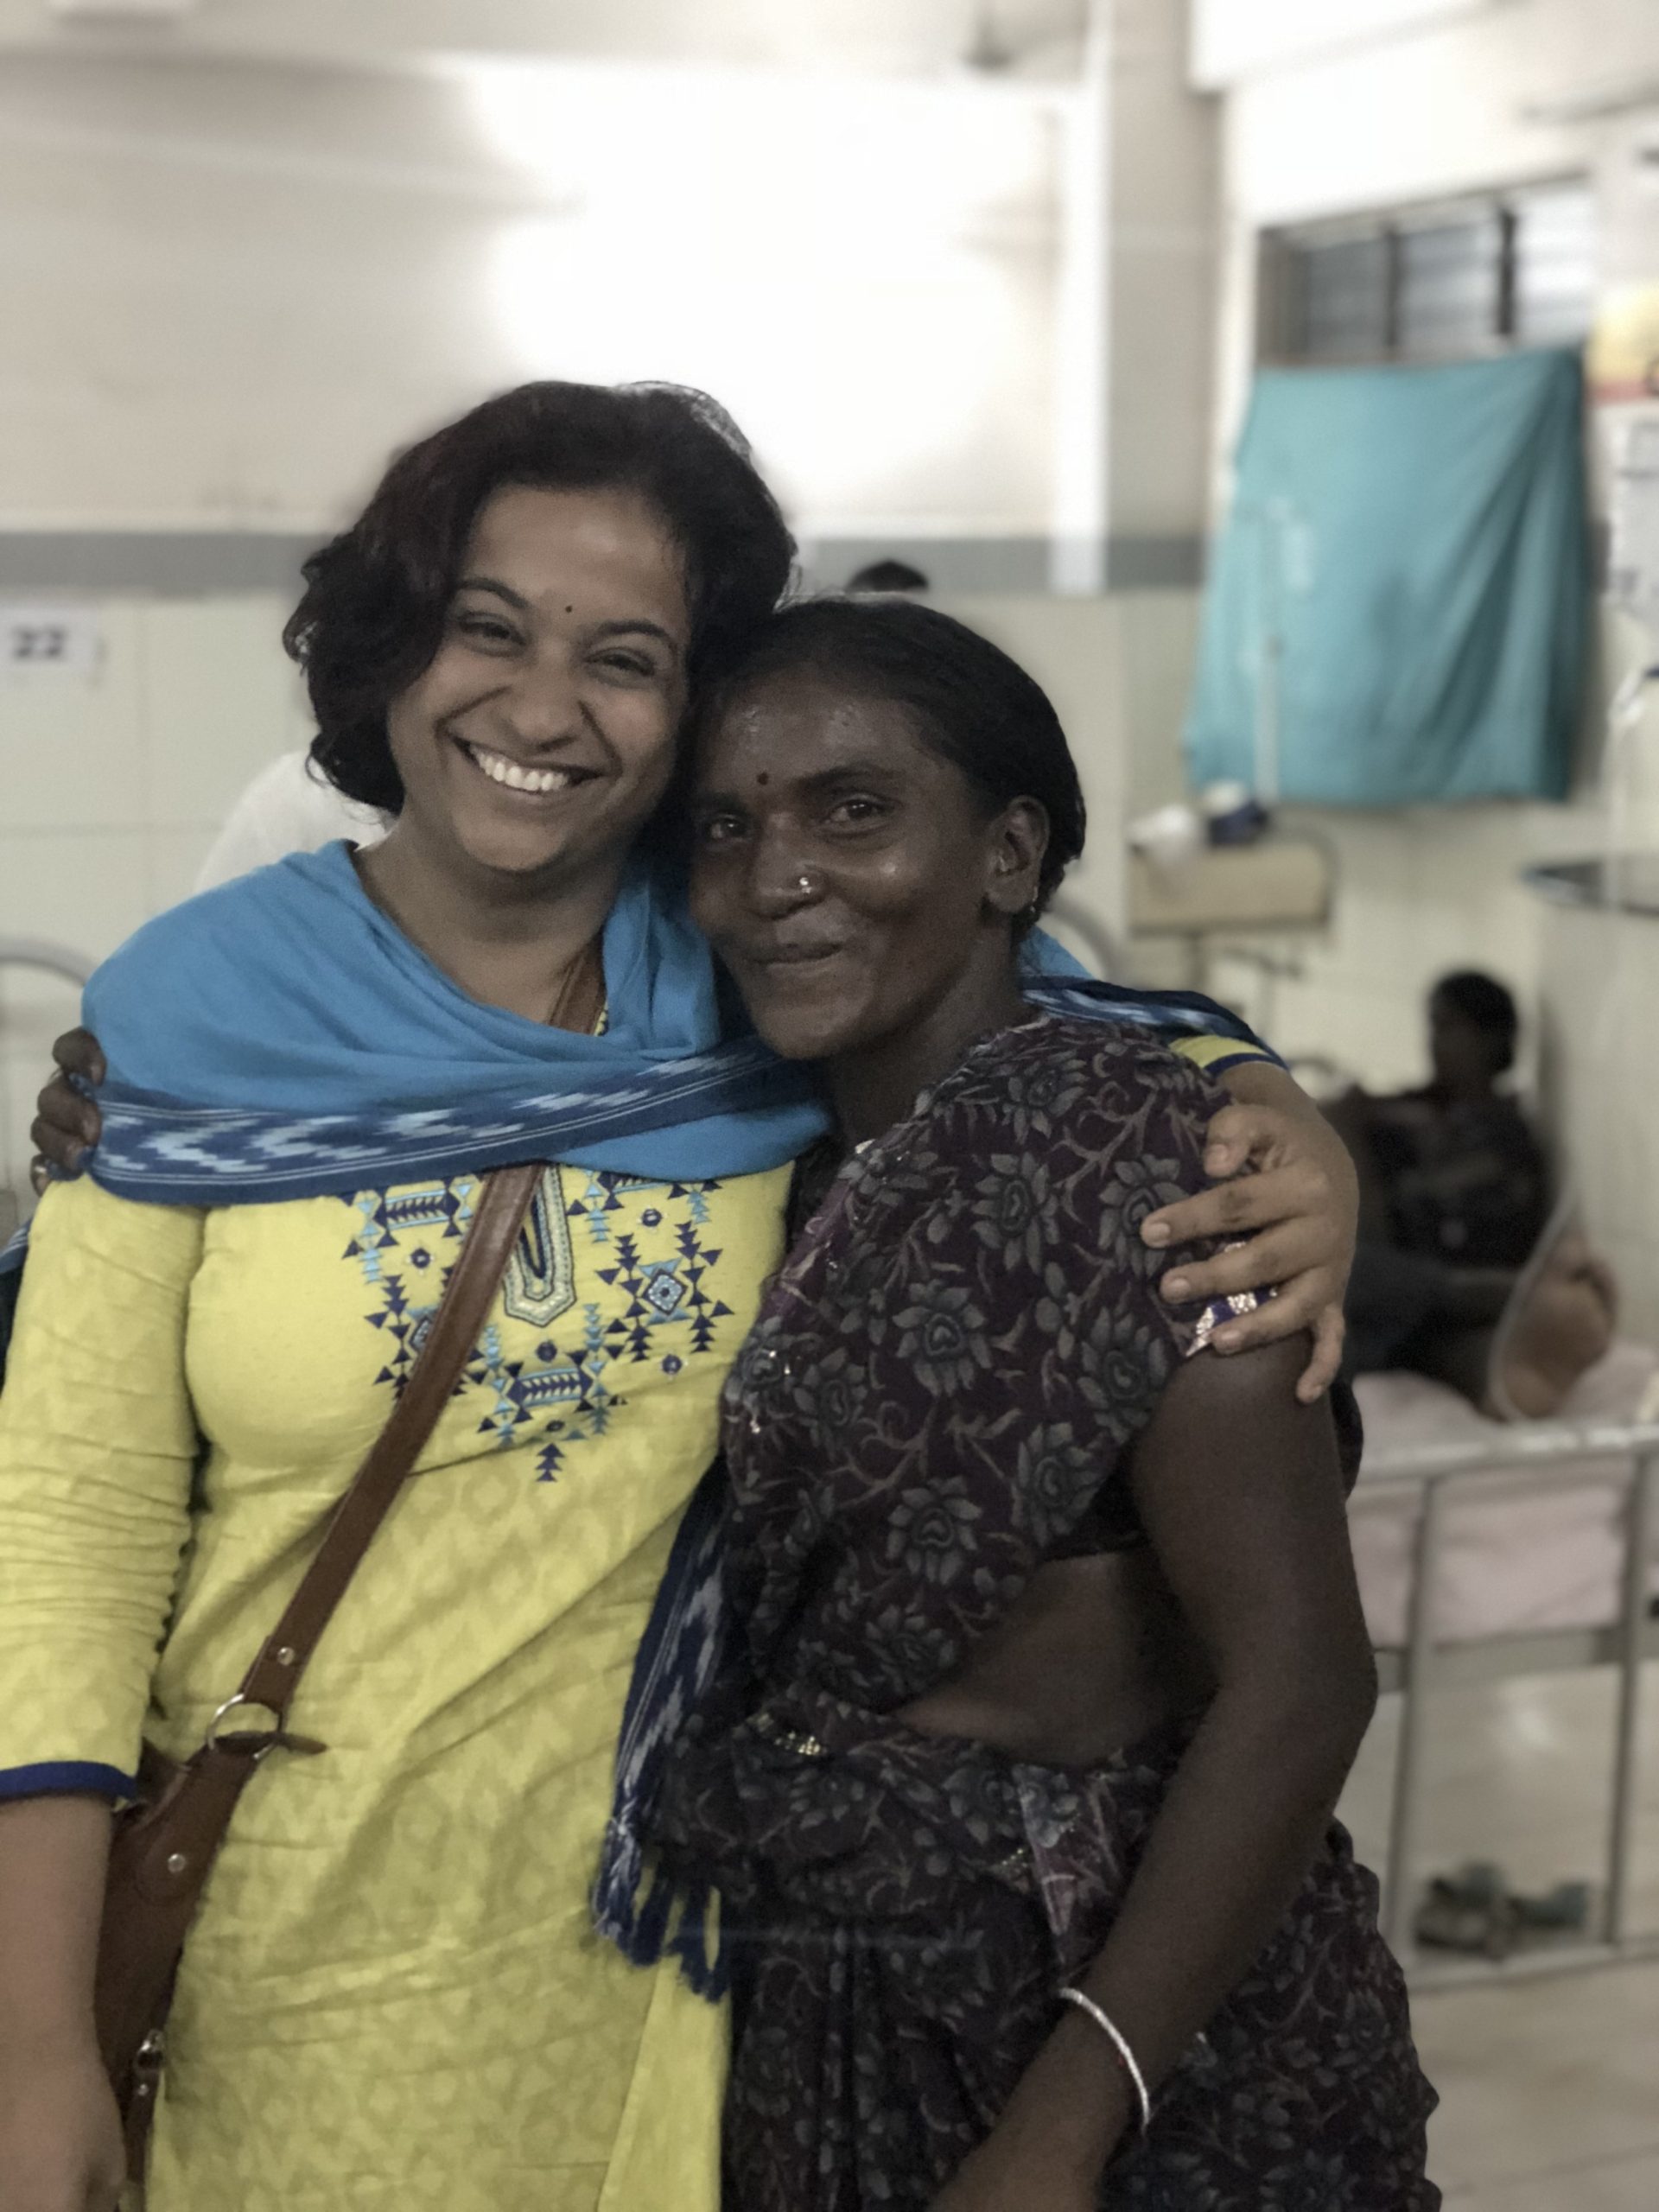 This Indian woman left her job to save the lives of distressed farmers